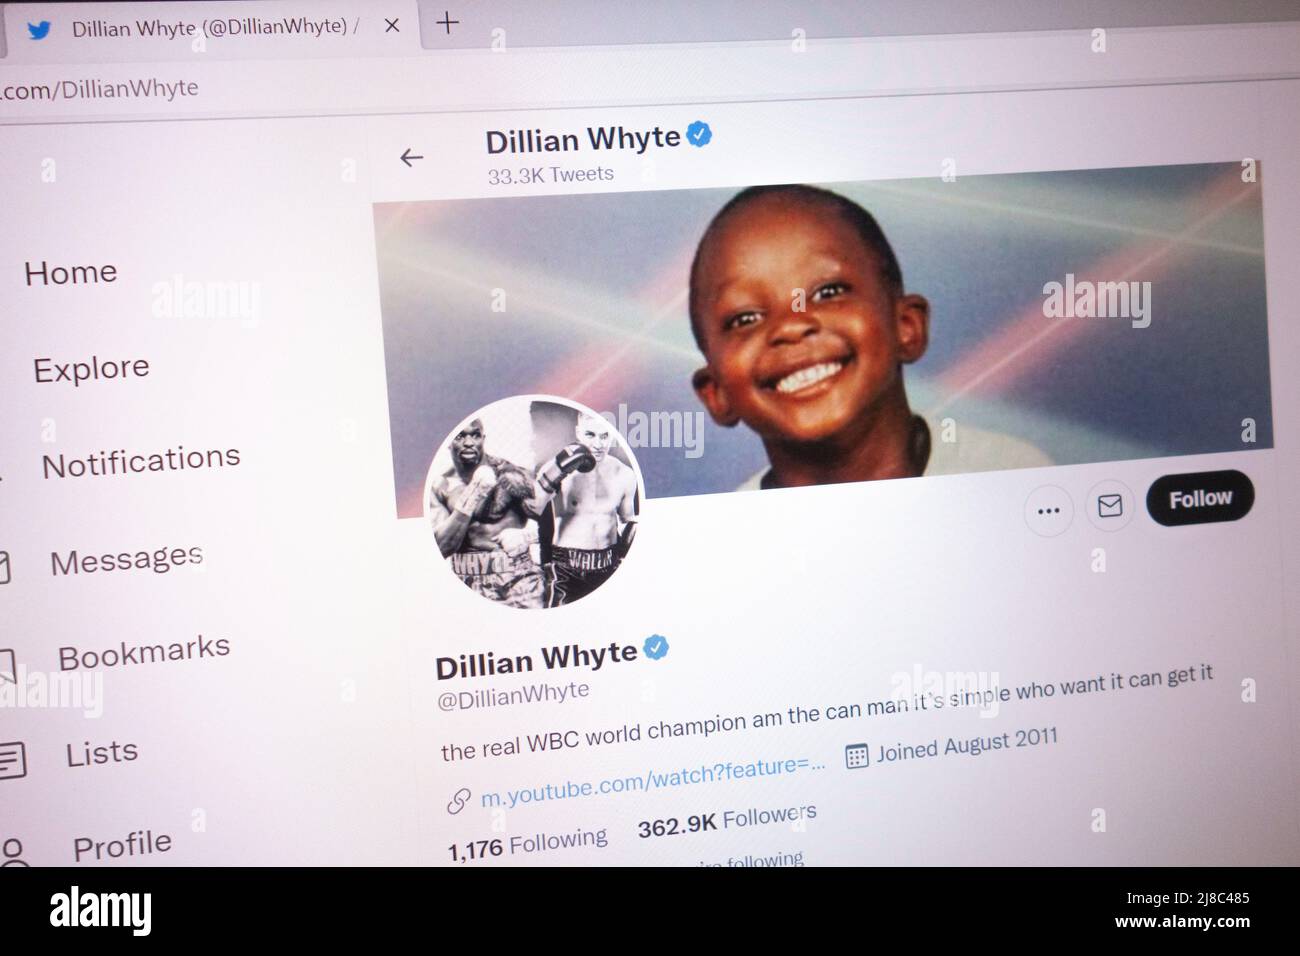 KONSKIE, POLAND - May 14, 2022: Dillian Whyte official Twitter account displayed on laptop screen Stock Photo